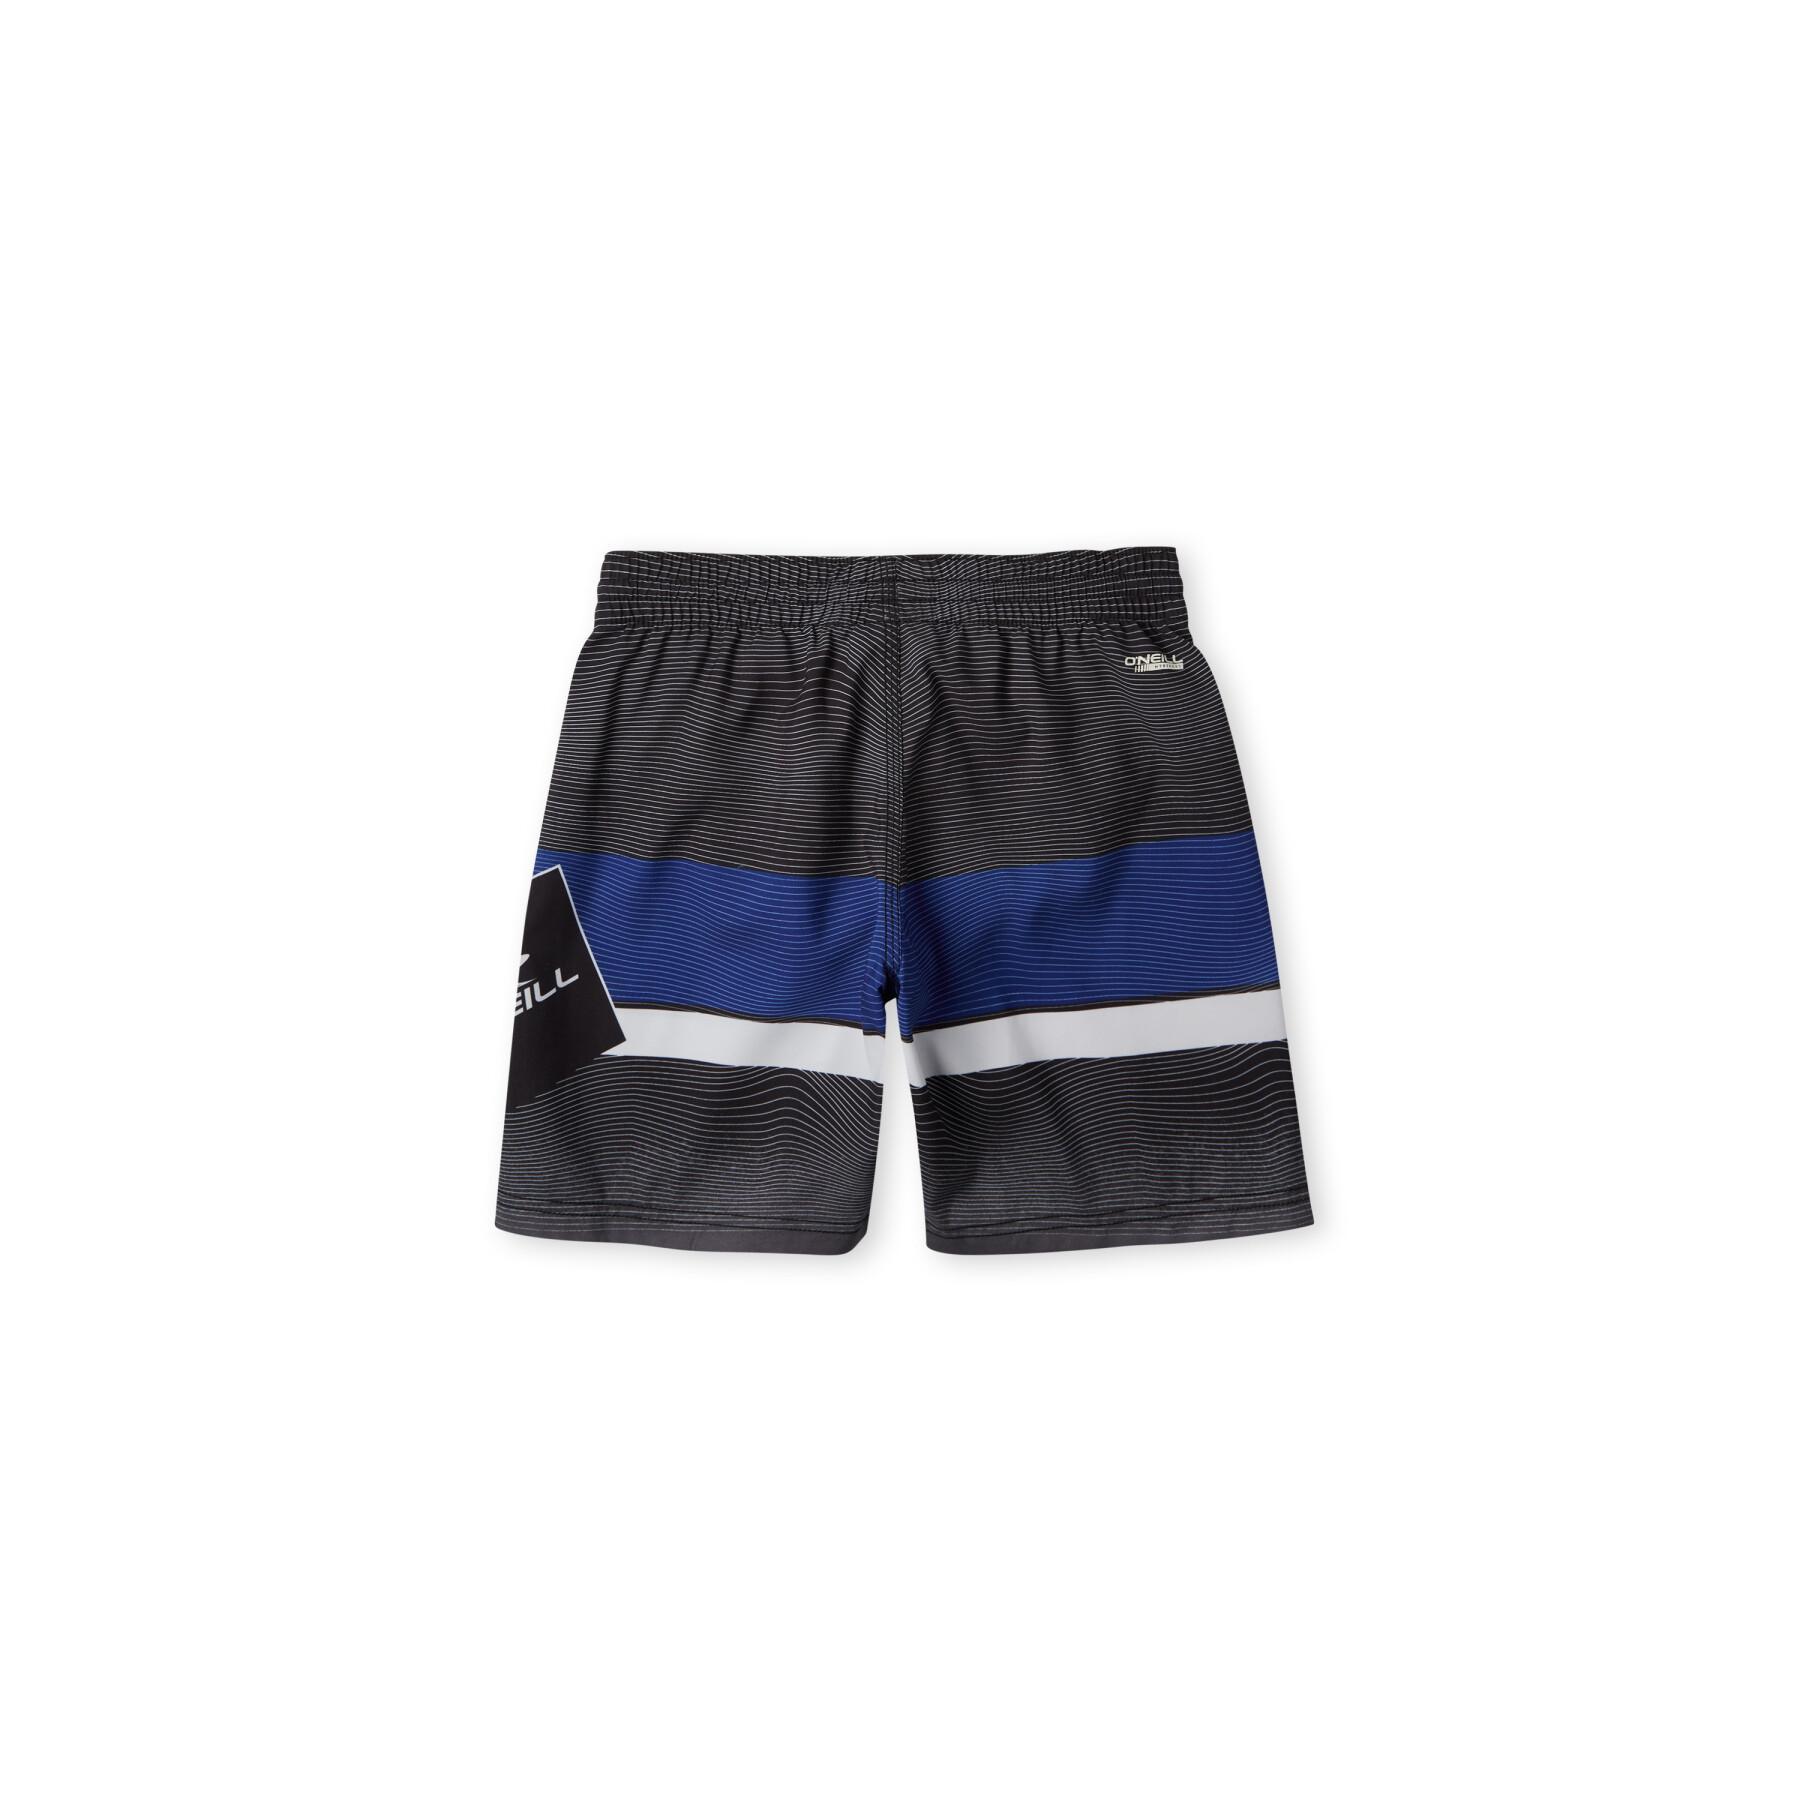 Kinder shorts O'Neill Stacked Plus